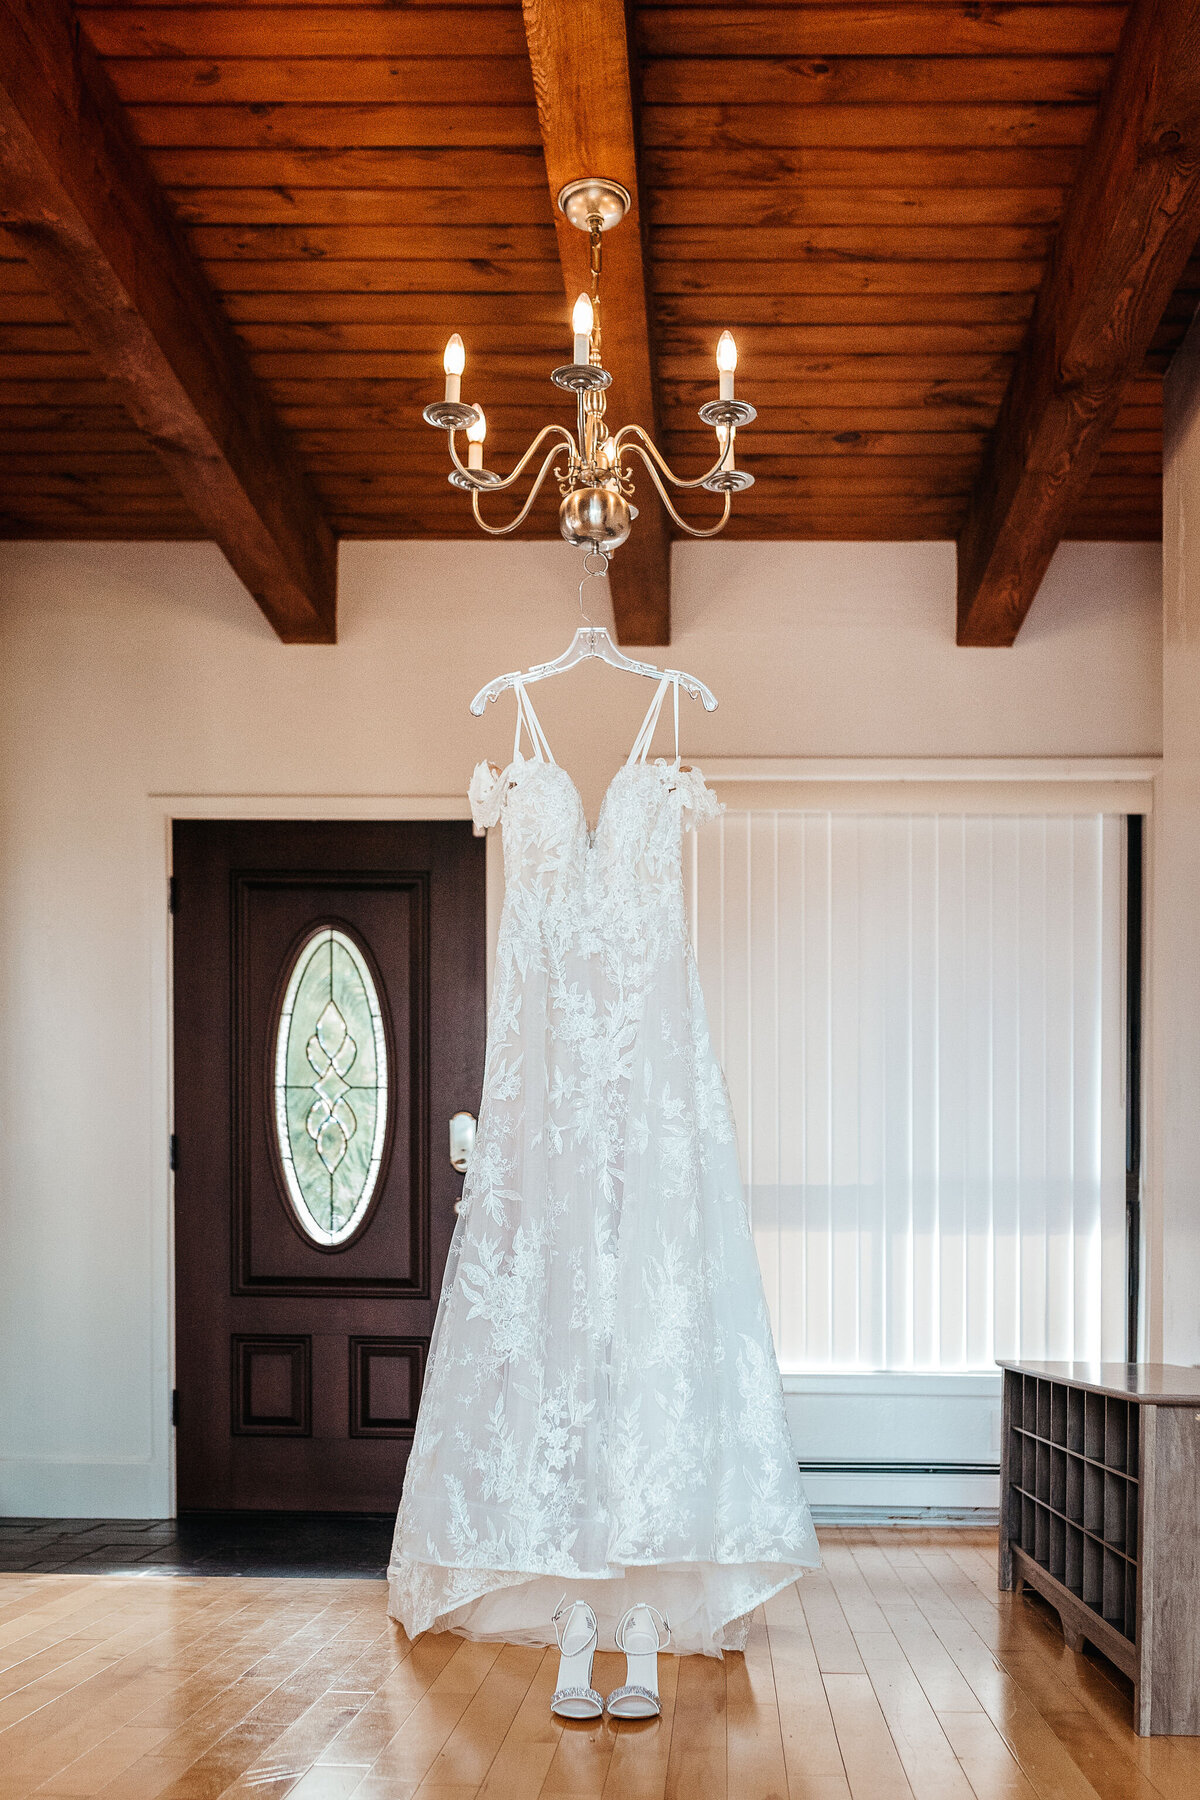 Wedding dress hanging from a chandelier in getting ready space at Sanborn Hill Farm wedding Venue by Lisa Smith Photography